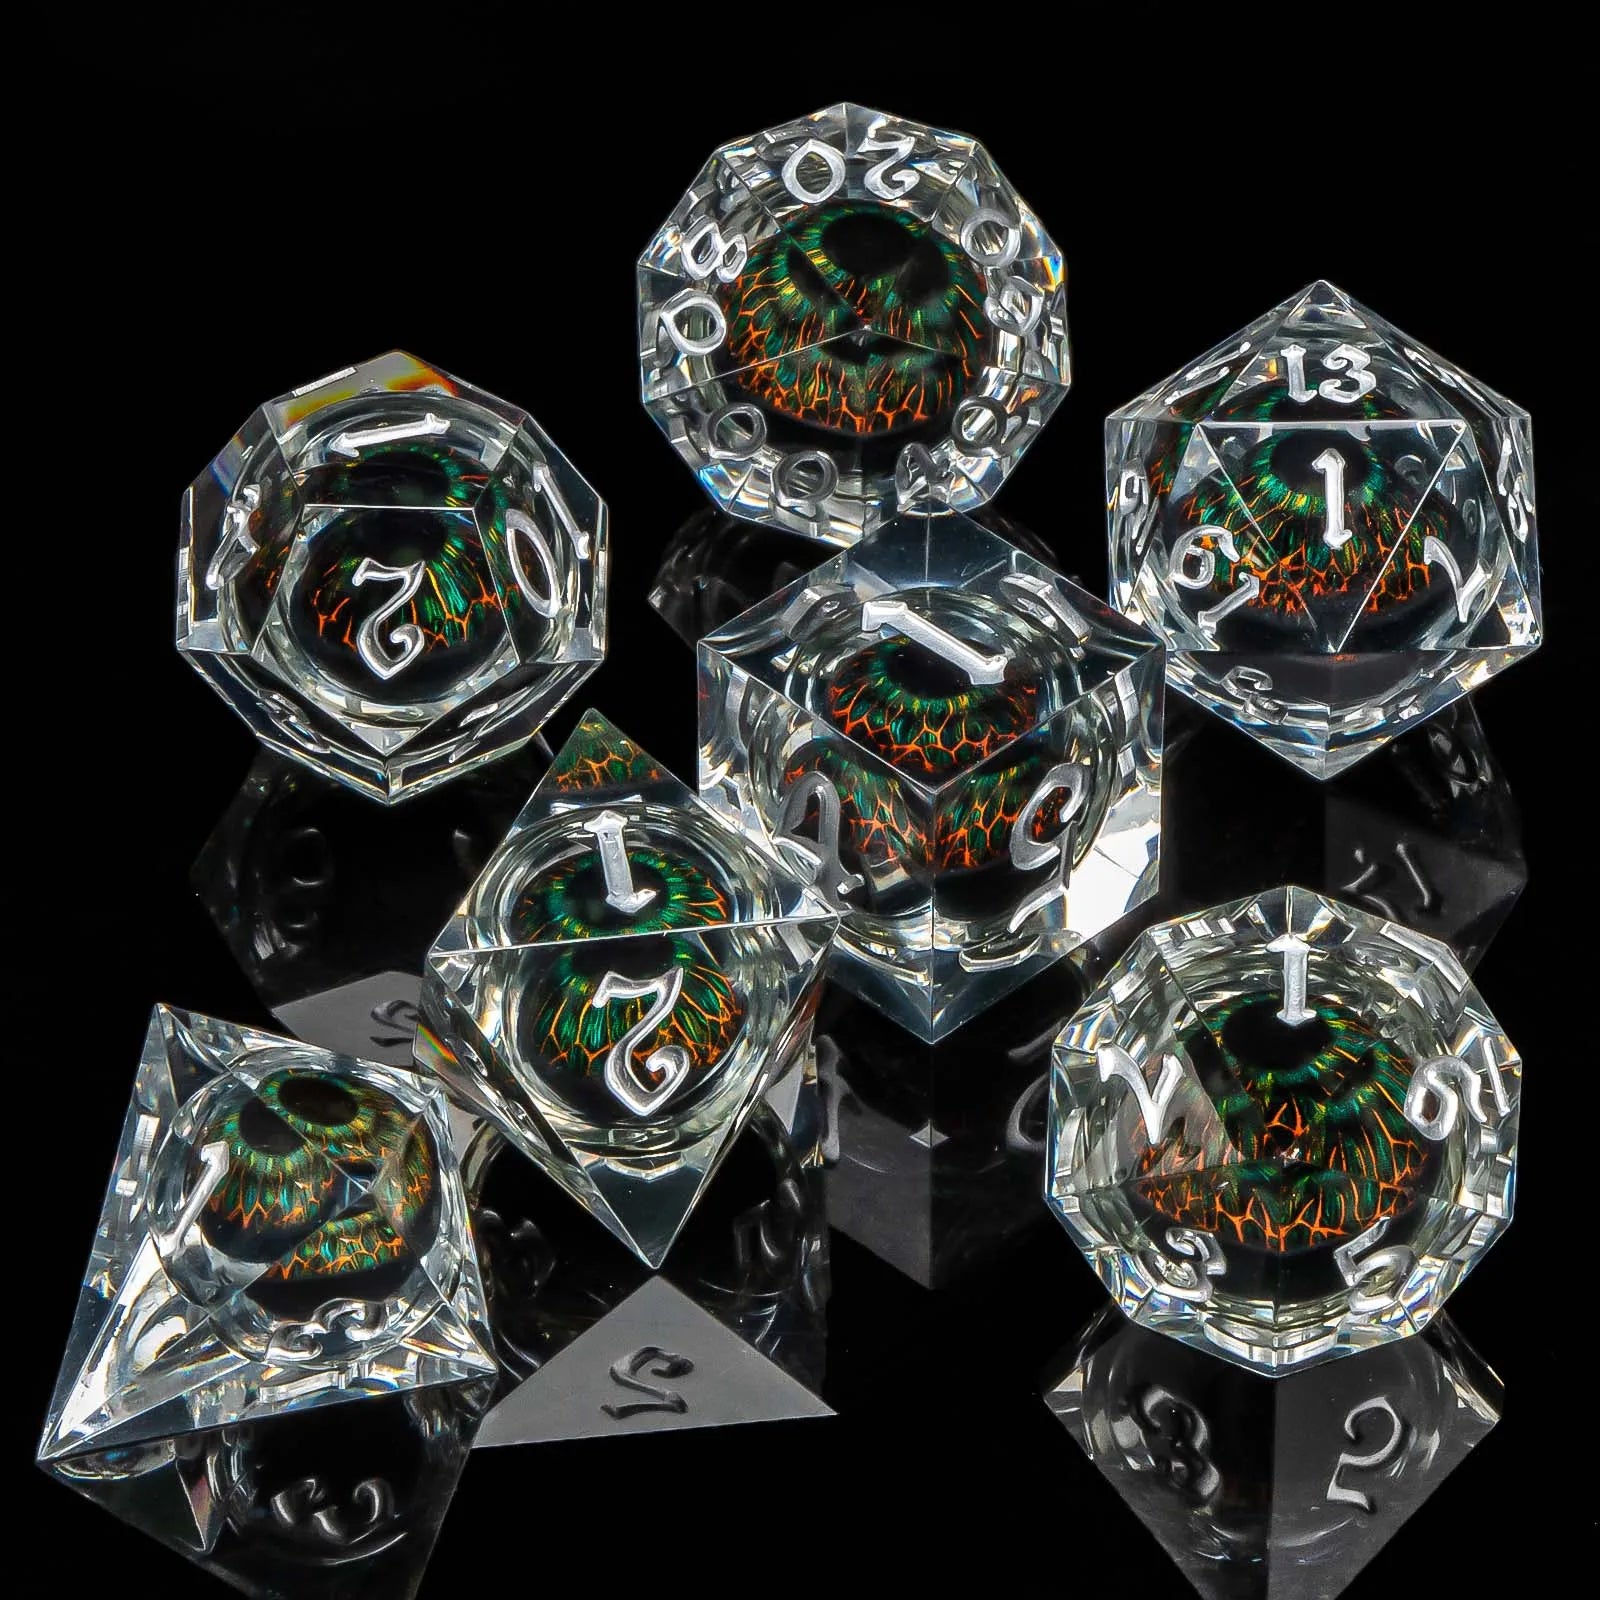 DND Eye Liquid Flow Core Resin D&D Dice Set For D and D Dungeon and Dragon Pathfinder Table Role Playing Game Polyhedral Dice AZ09